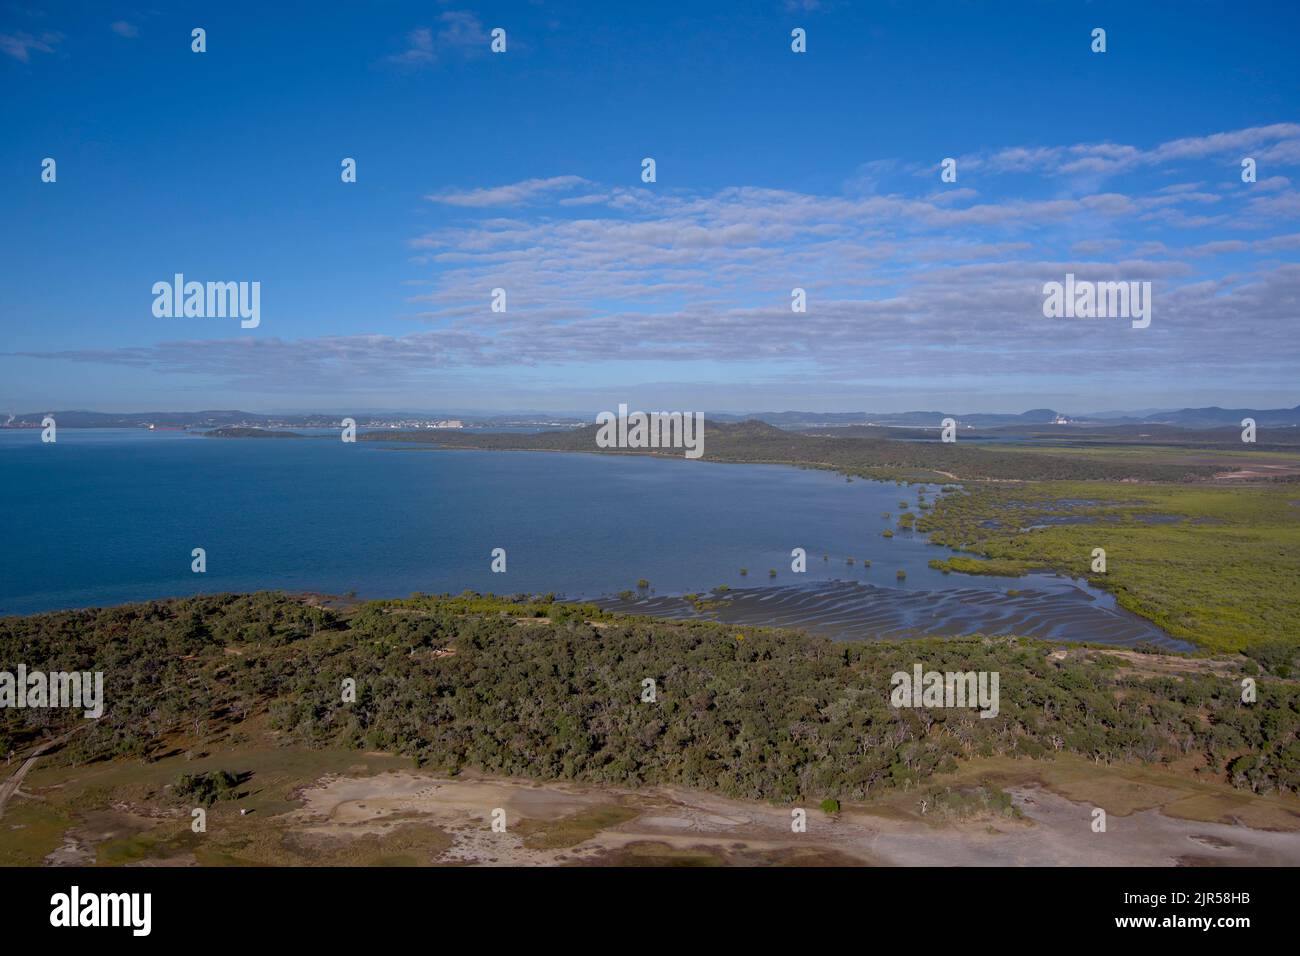 Looking across from Southend on Curtis Island to Gladstone Queensland Australia Stock Photo